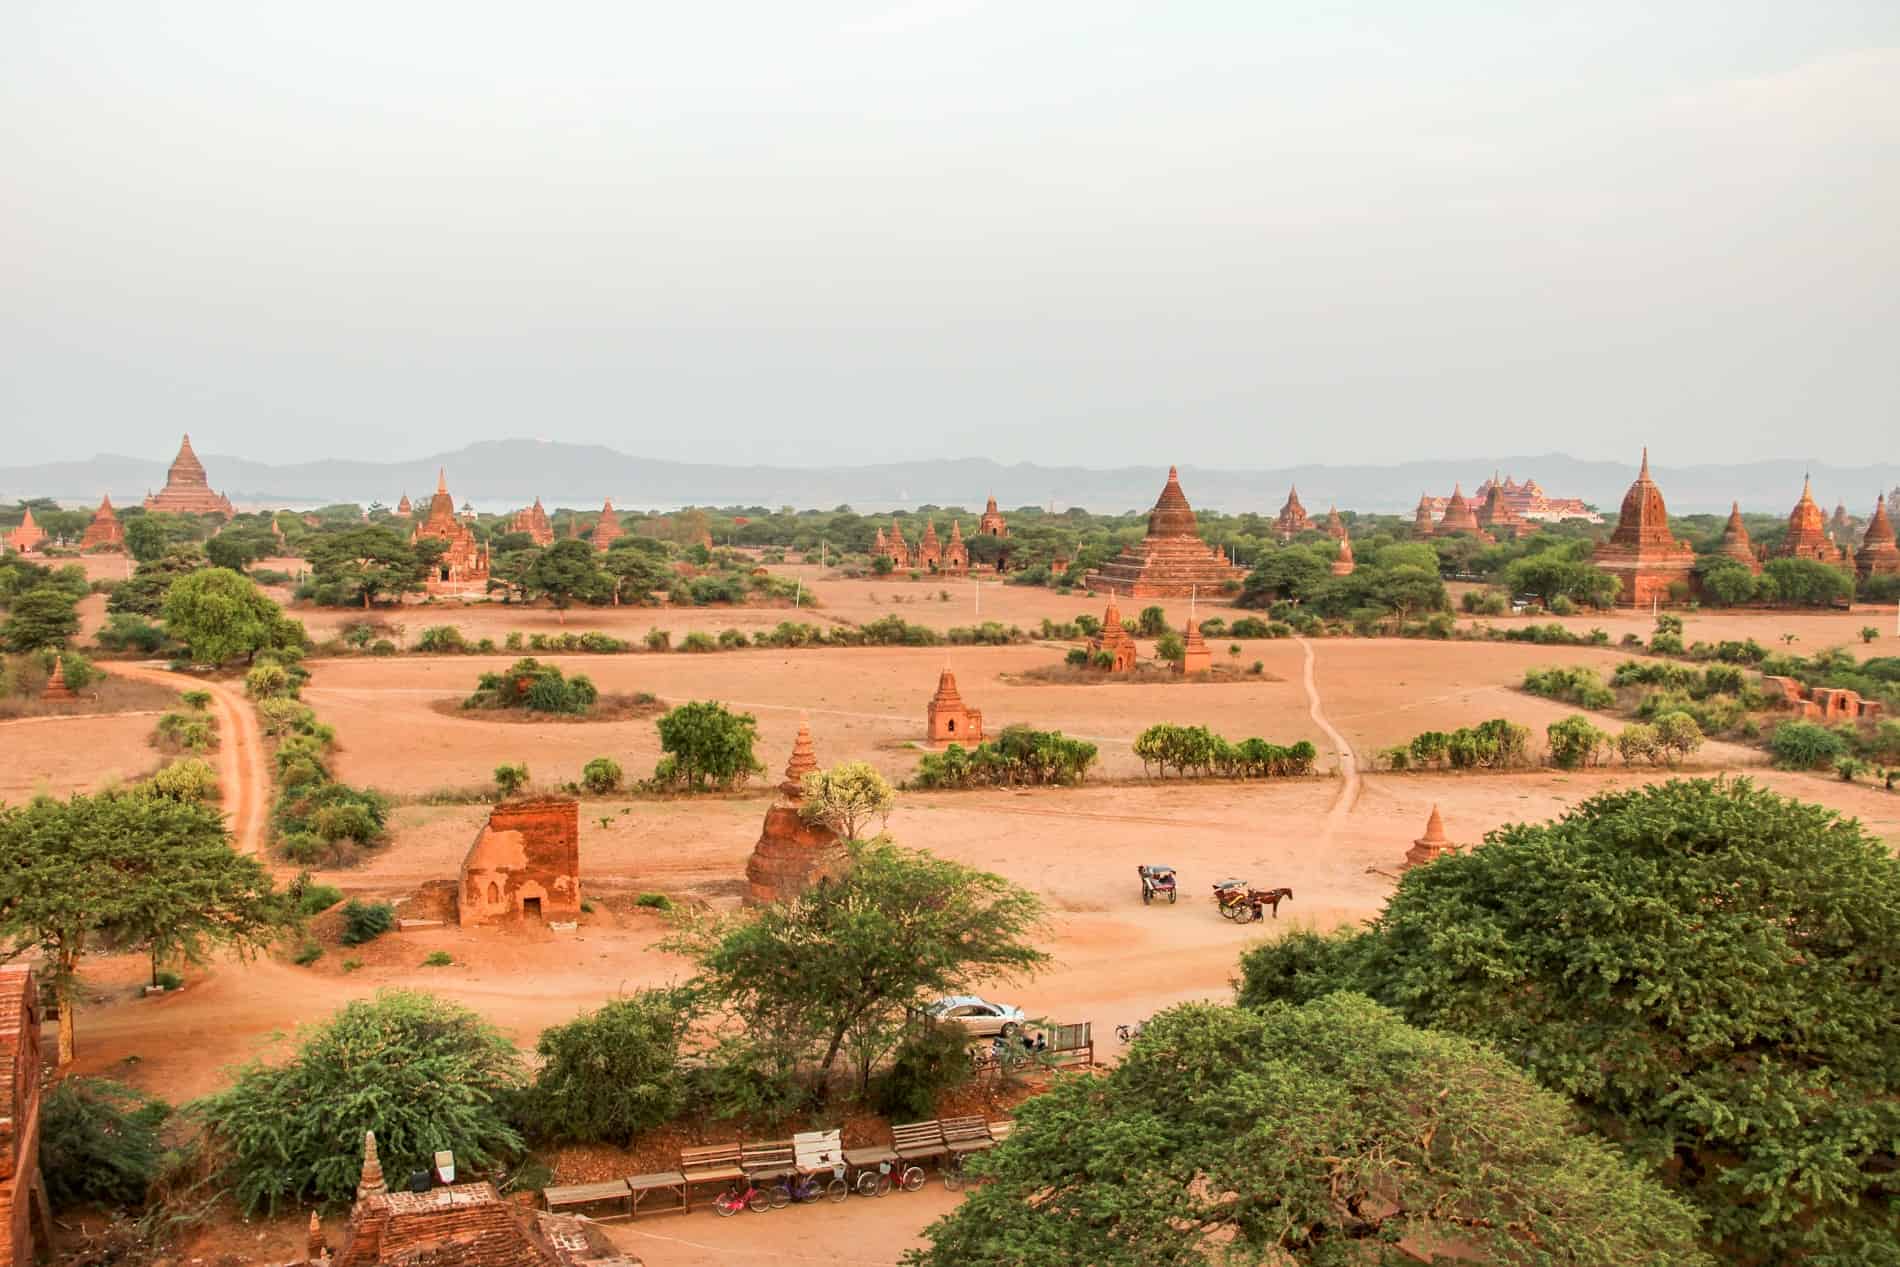 A vast tree dotted field filled with dozens of orange brick temple pagodas illuminated in a golden sunrise glow. 